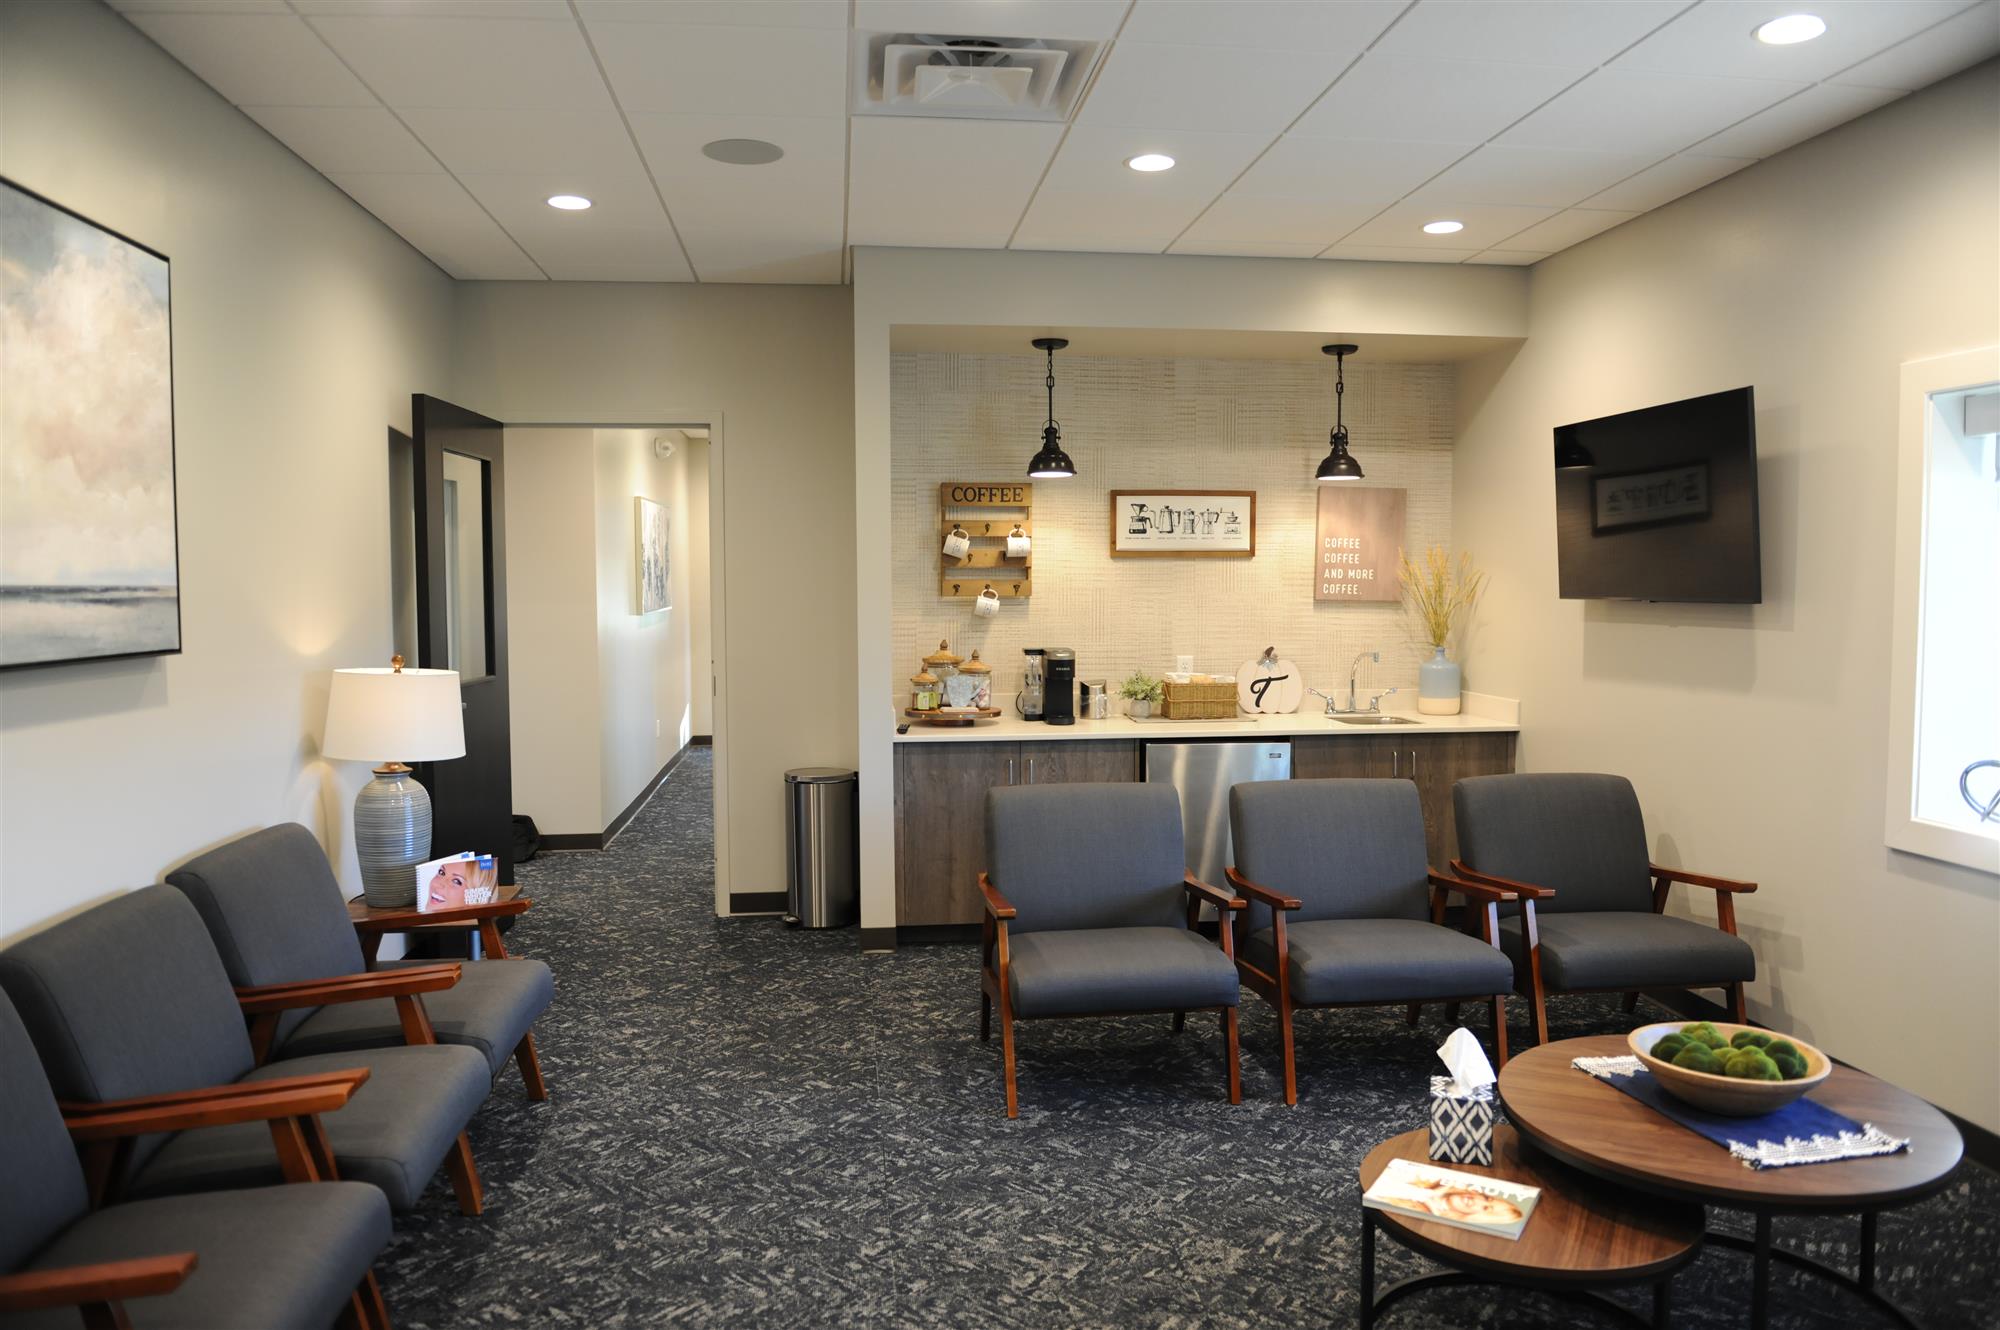 Tanty Family Dental Lounge in Waukesha, WI